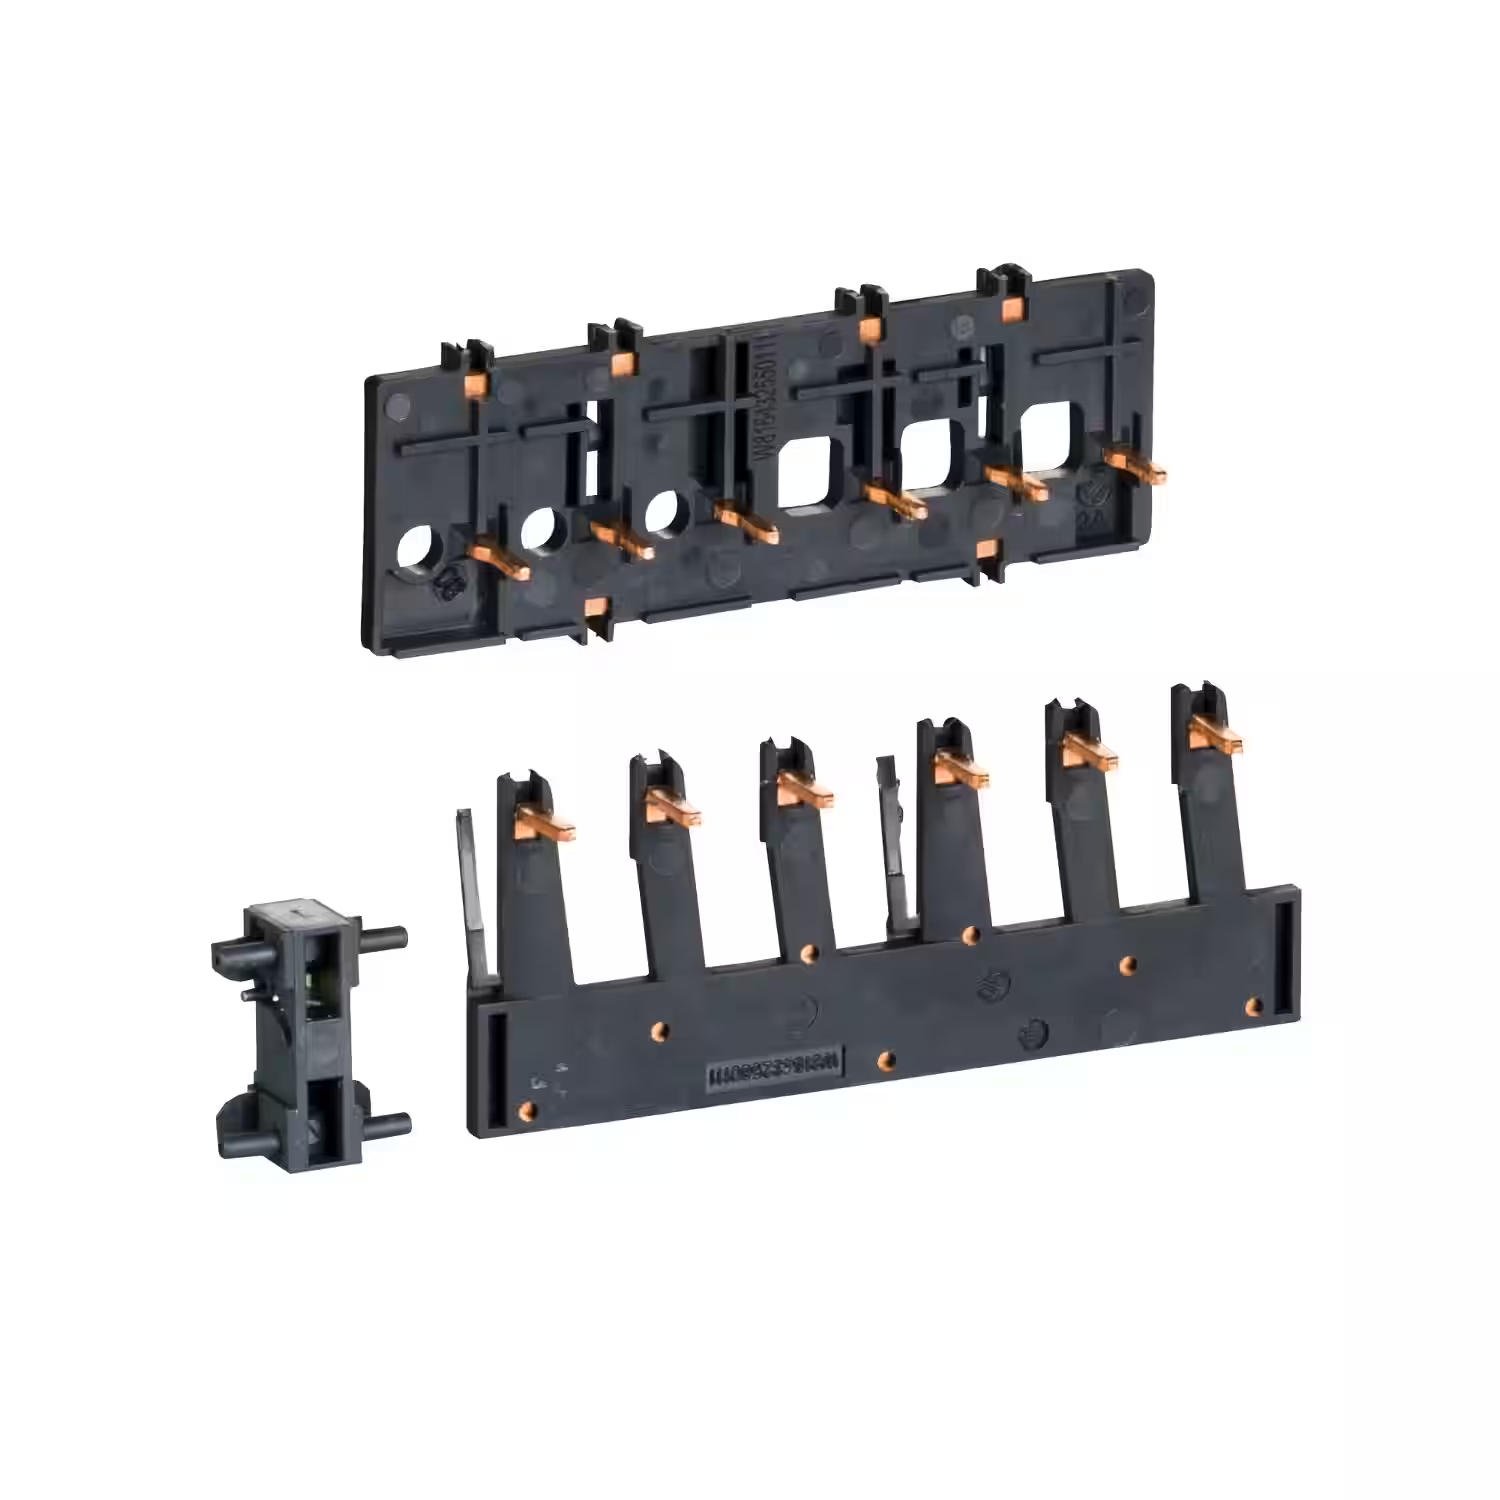 Kit for assembling 3P reversing contactors, LC1D09-D38 with screw clamp terminals, without electrical interlock.